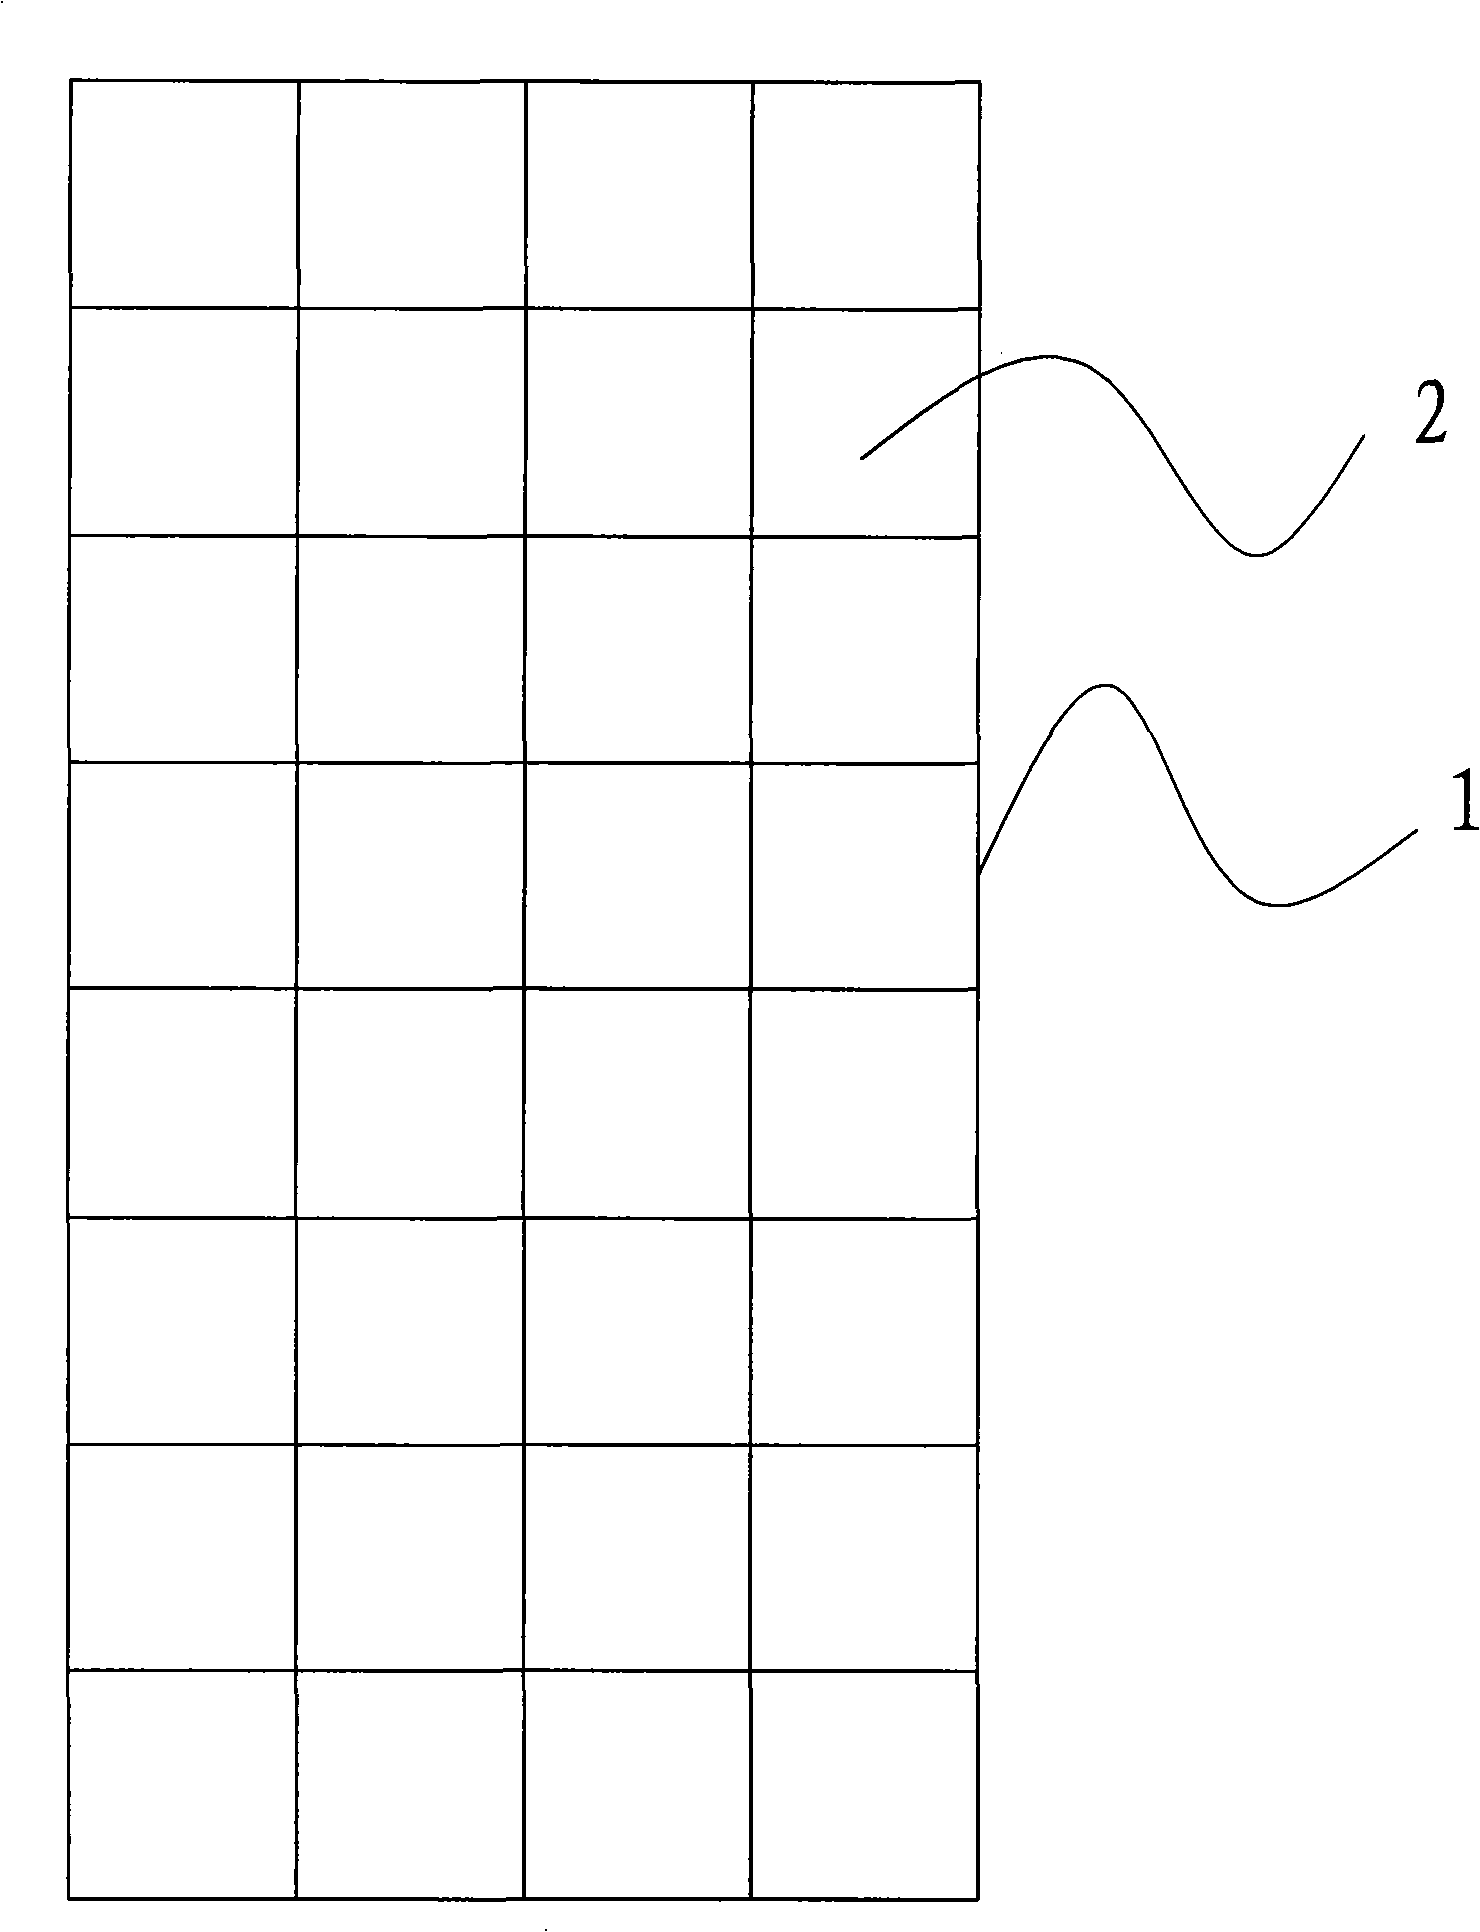 Duck wheat shell health care mattress and method for producing the same